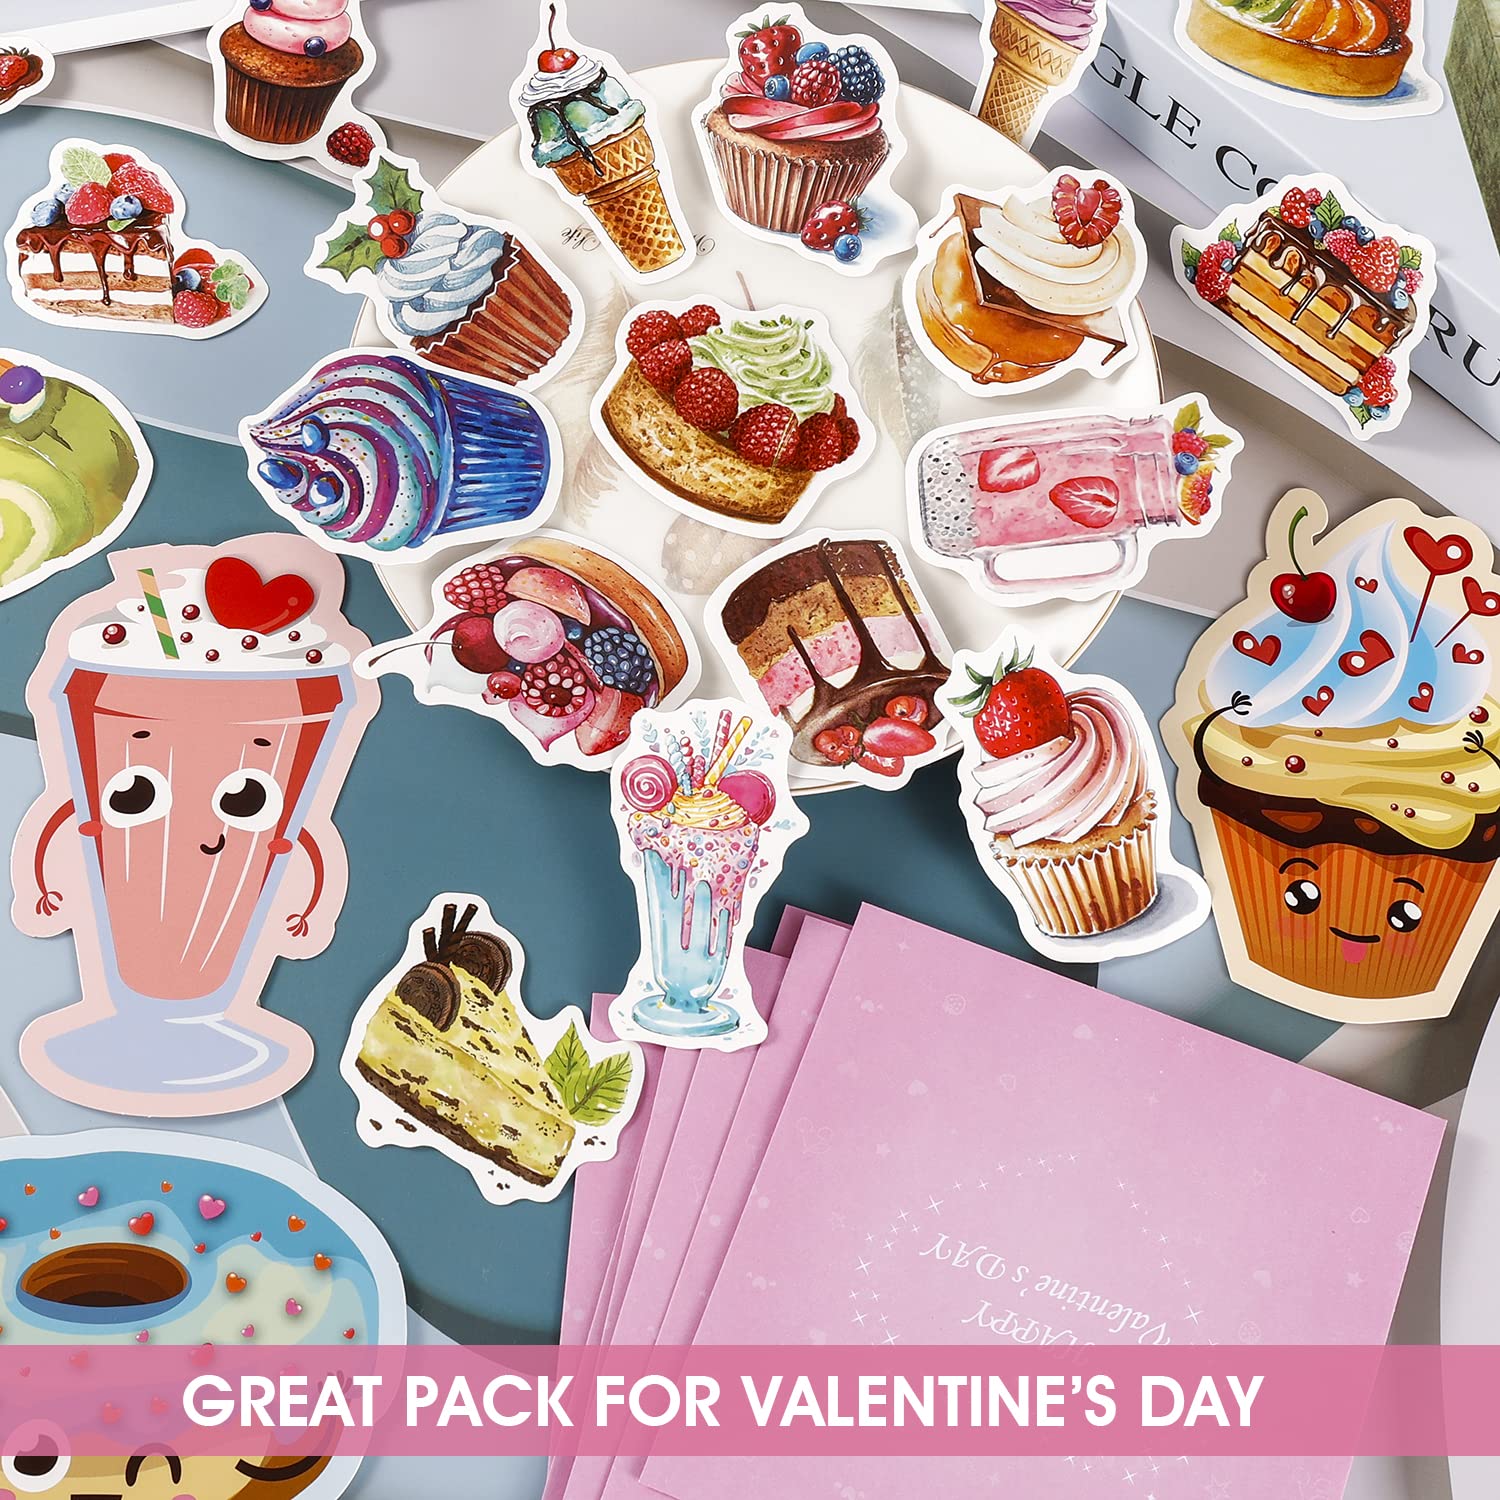 AOJOYS Valentines Day Cards for Kids, 36 Pack Kids Valentines Day Cards with Cute Temporary Tattoos, Pink Envelopes & 80PCS Stickers, Valentines Cards for Classroom Exchange